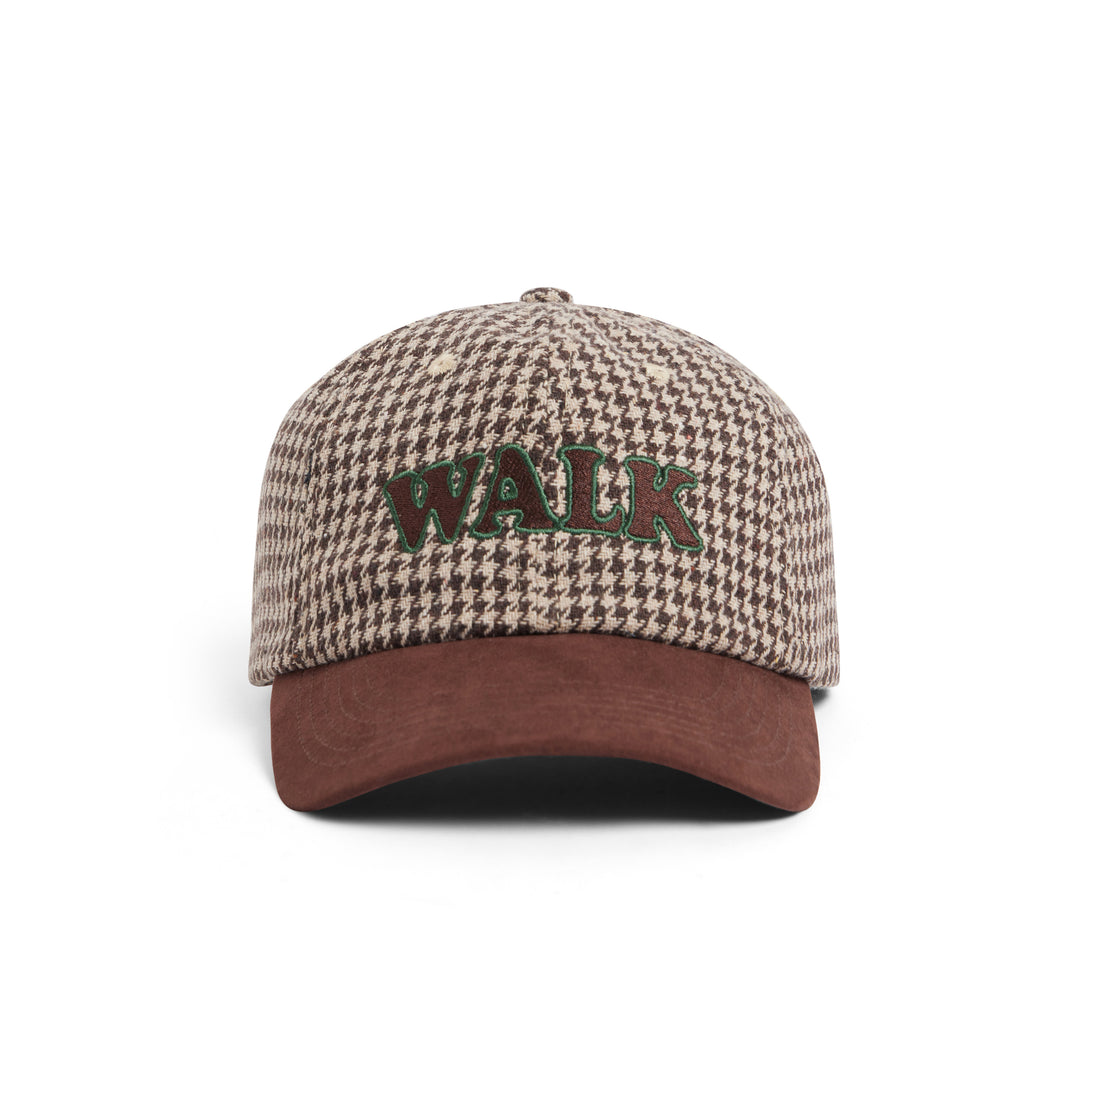 The houndstooth cap